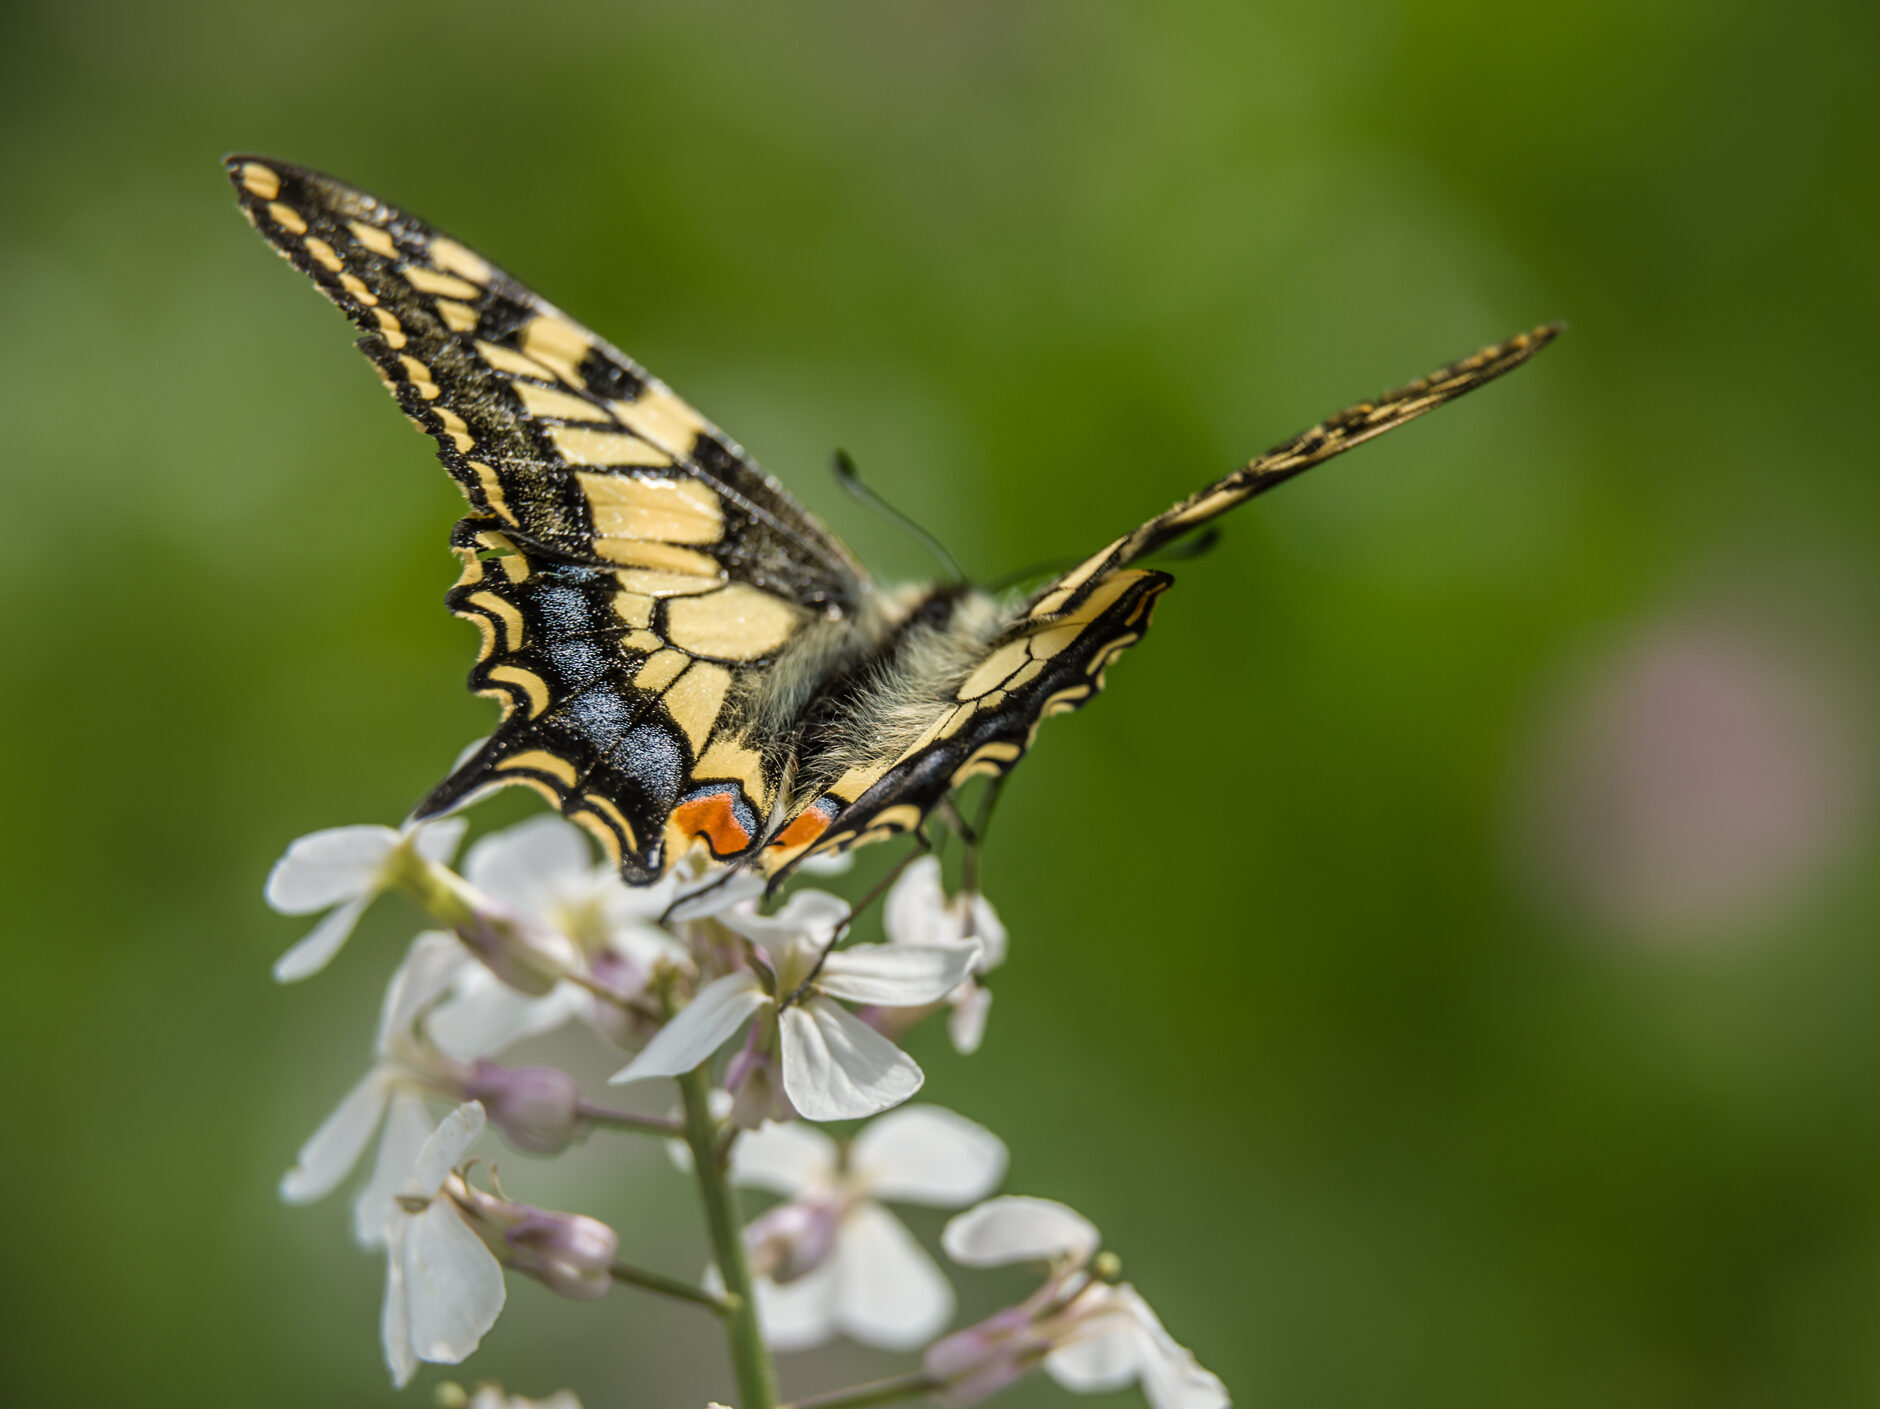 Great Britain’s rarest butterfly, the Swallowtail, calls only the Norfolk Broads home.